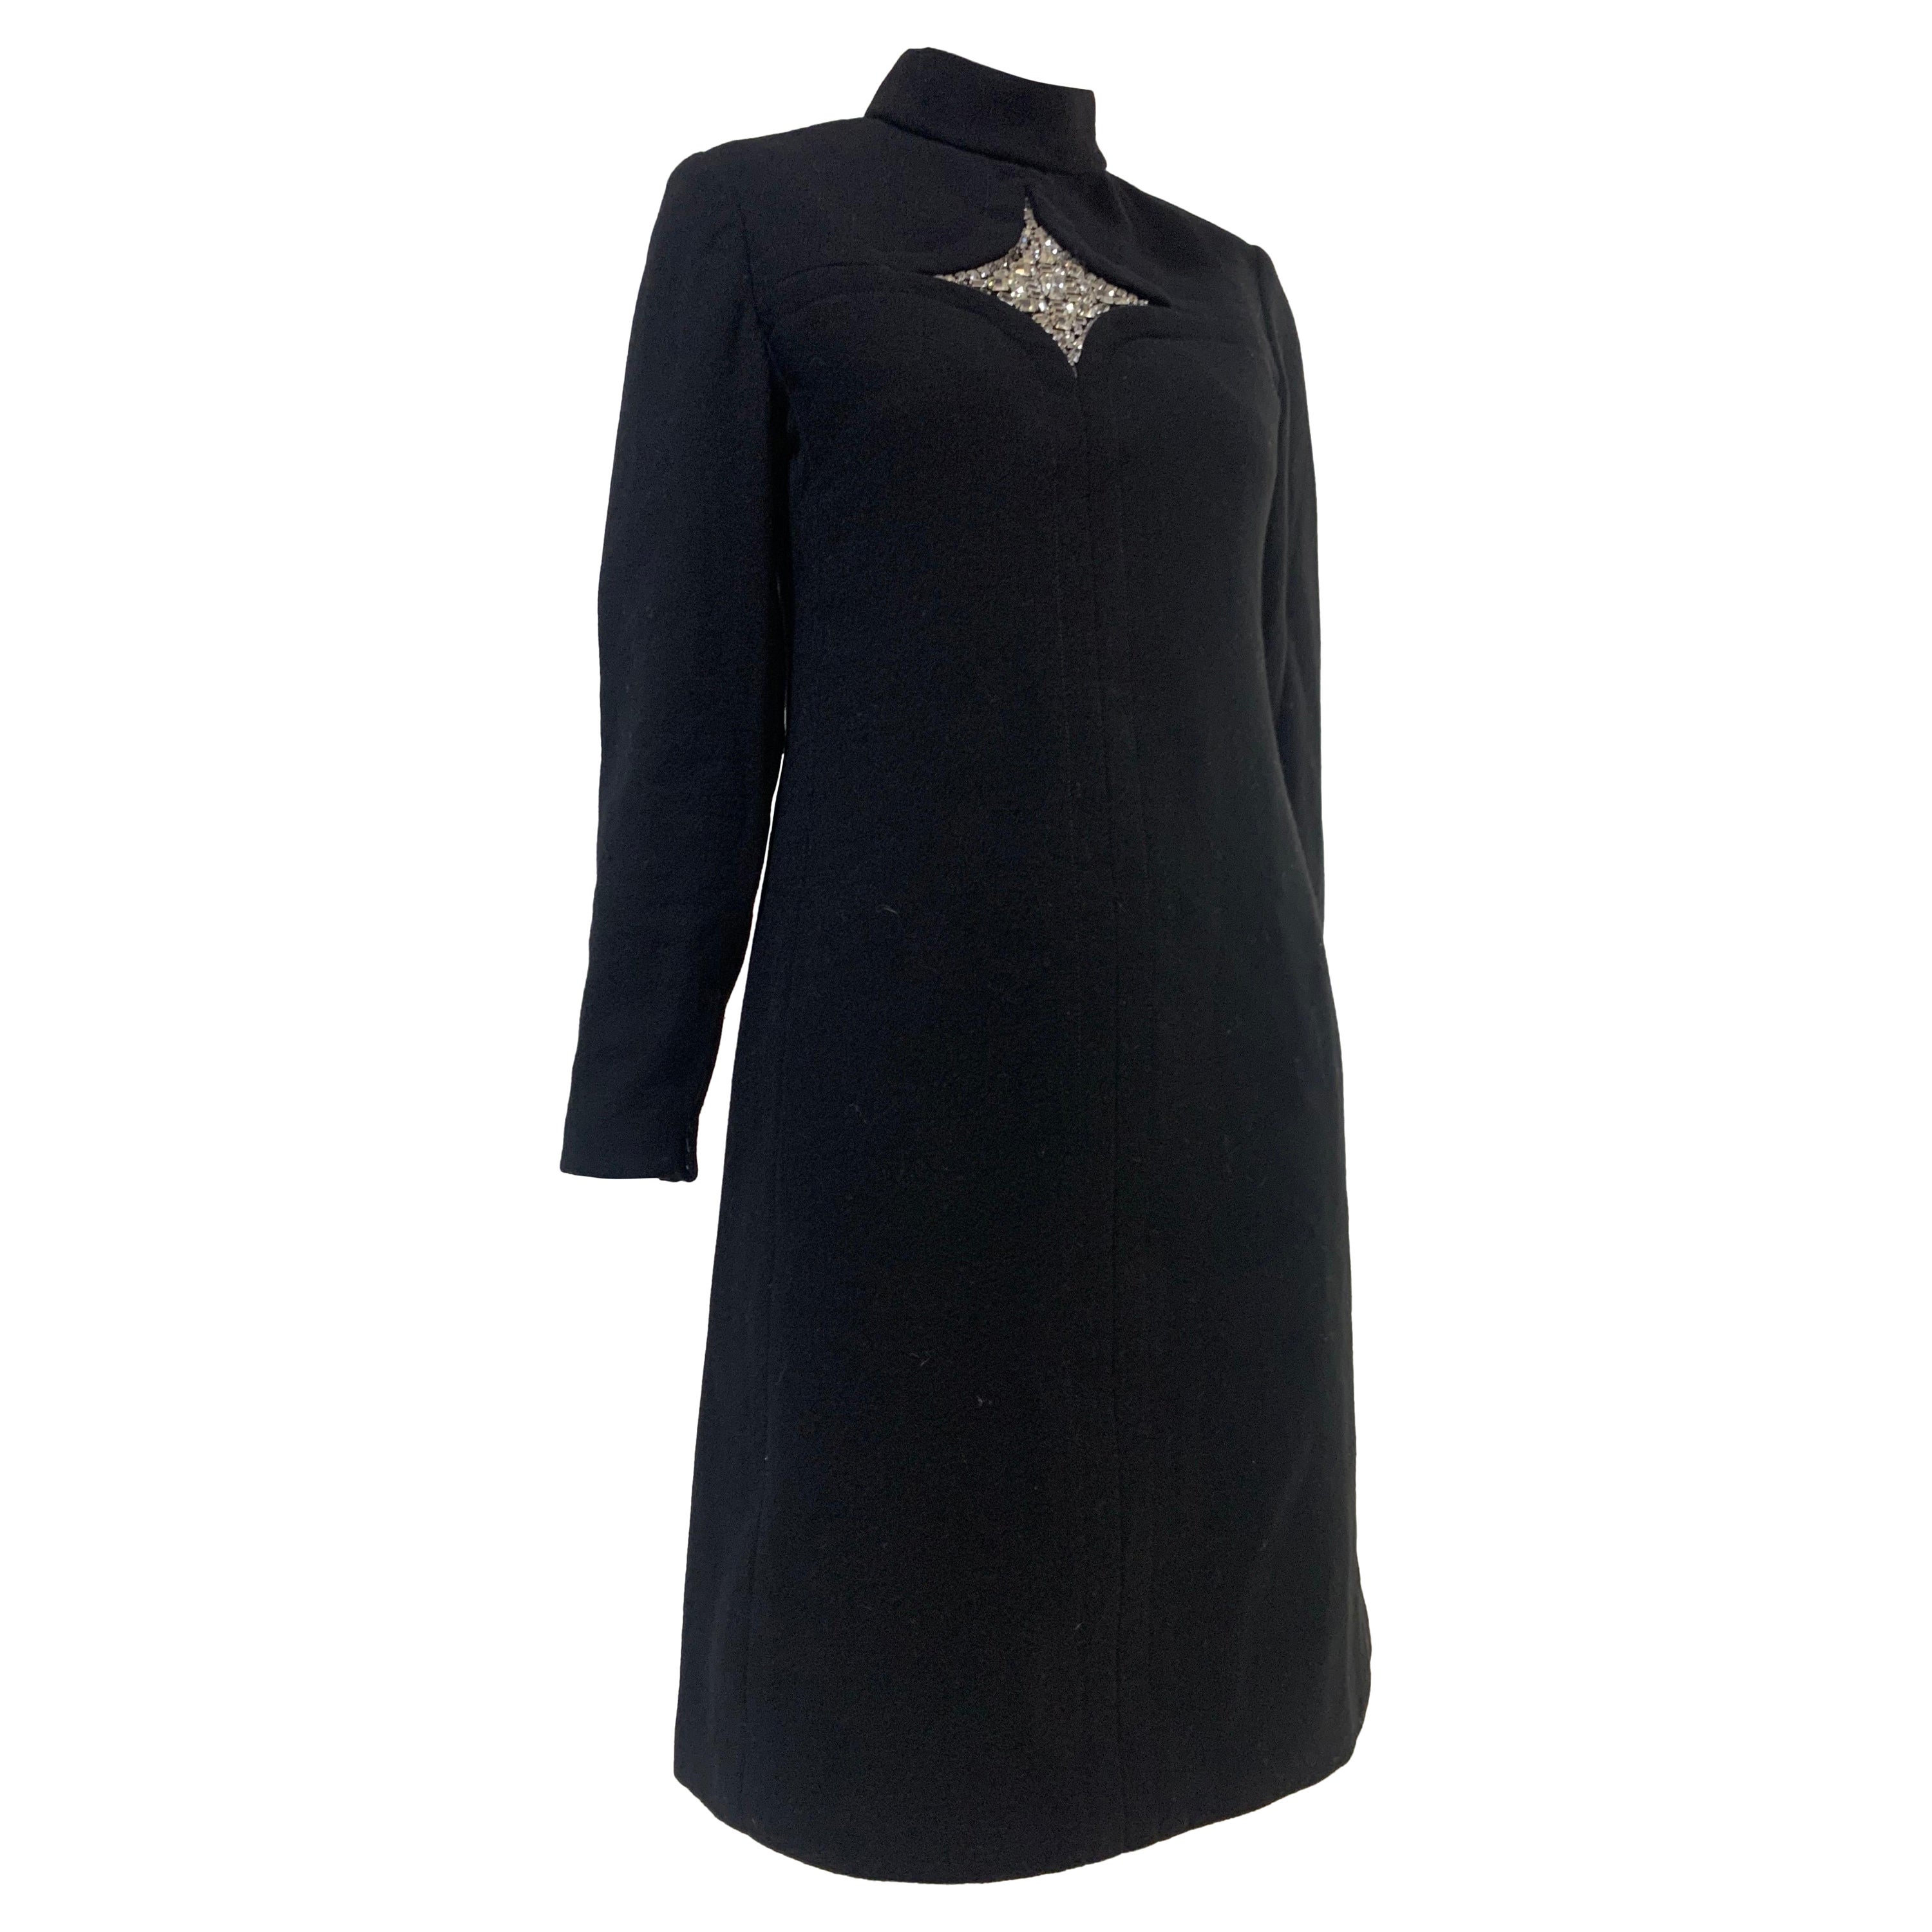 1960s Mod Wool Crepe Tailored Cocktail Dress w/ Rhinestone Star Inset at Center For Sale